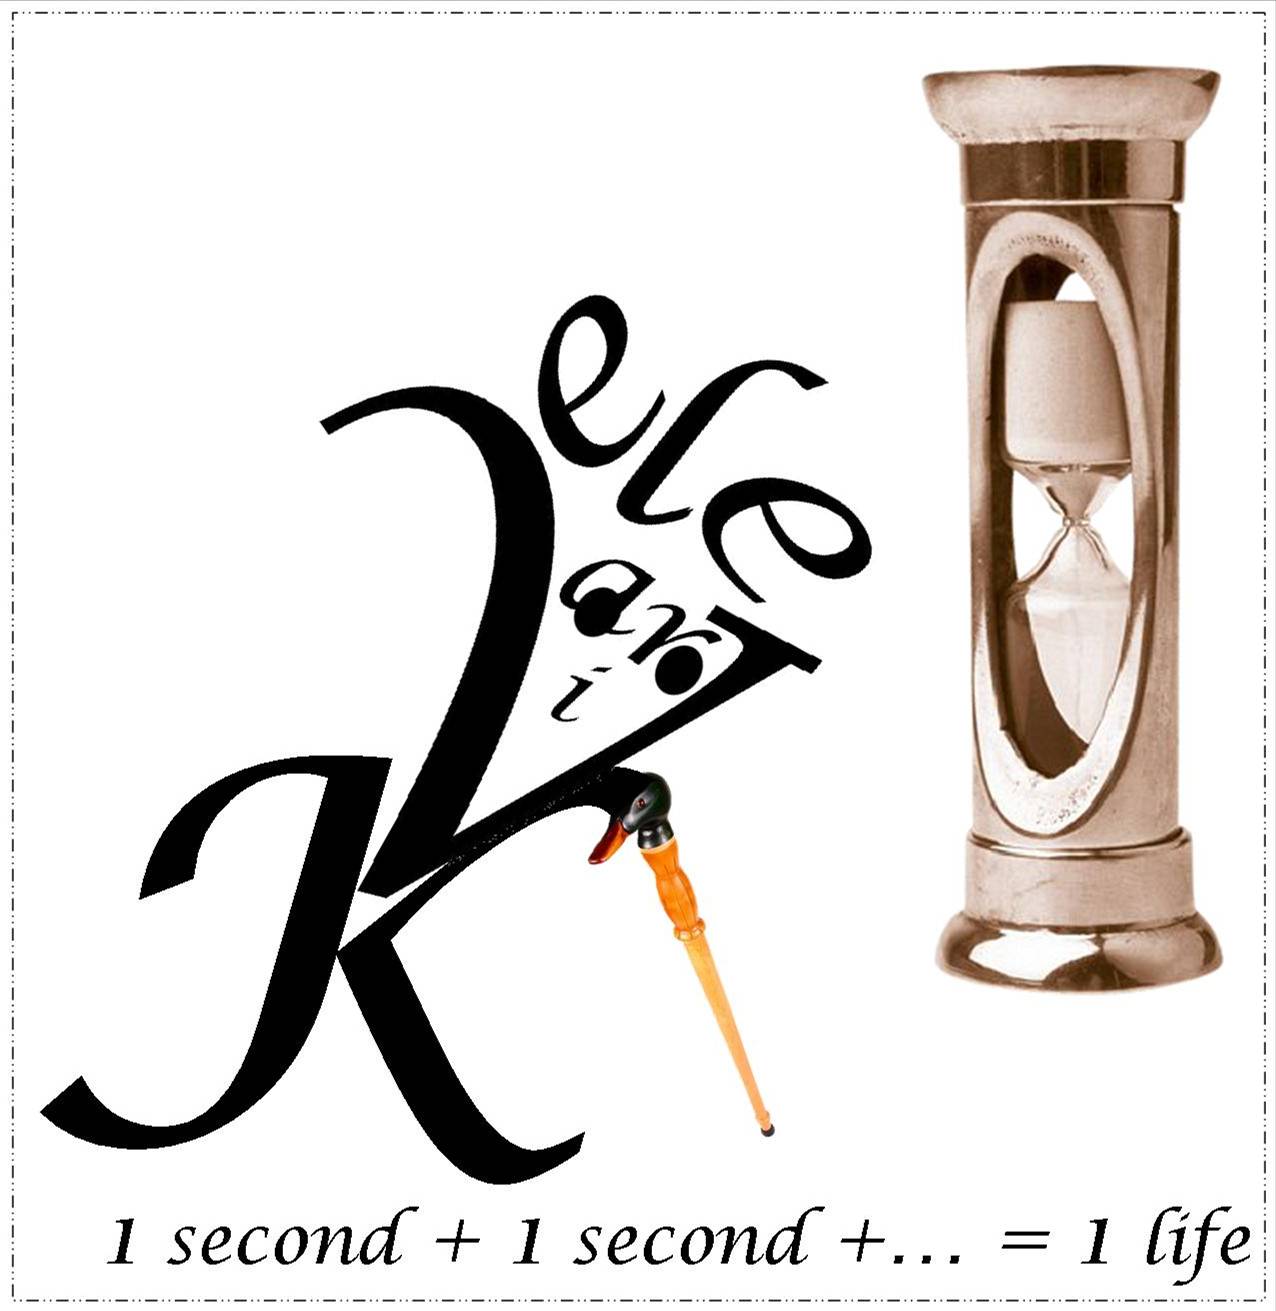 1 second + 1 second +... =1 life